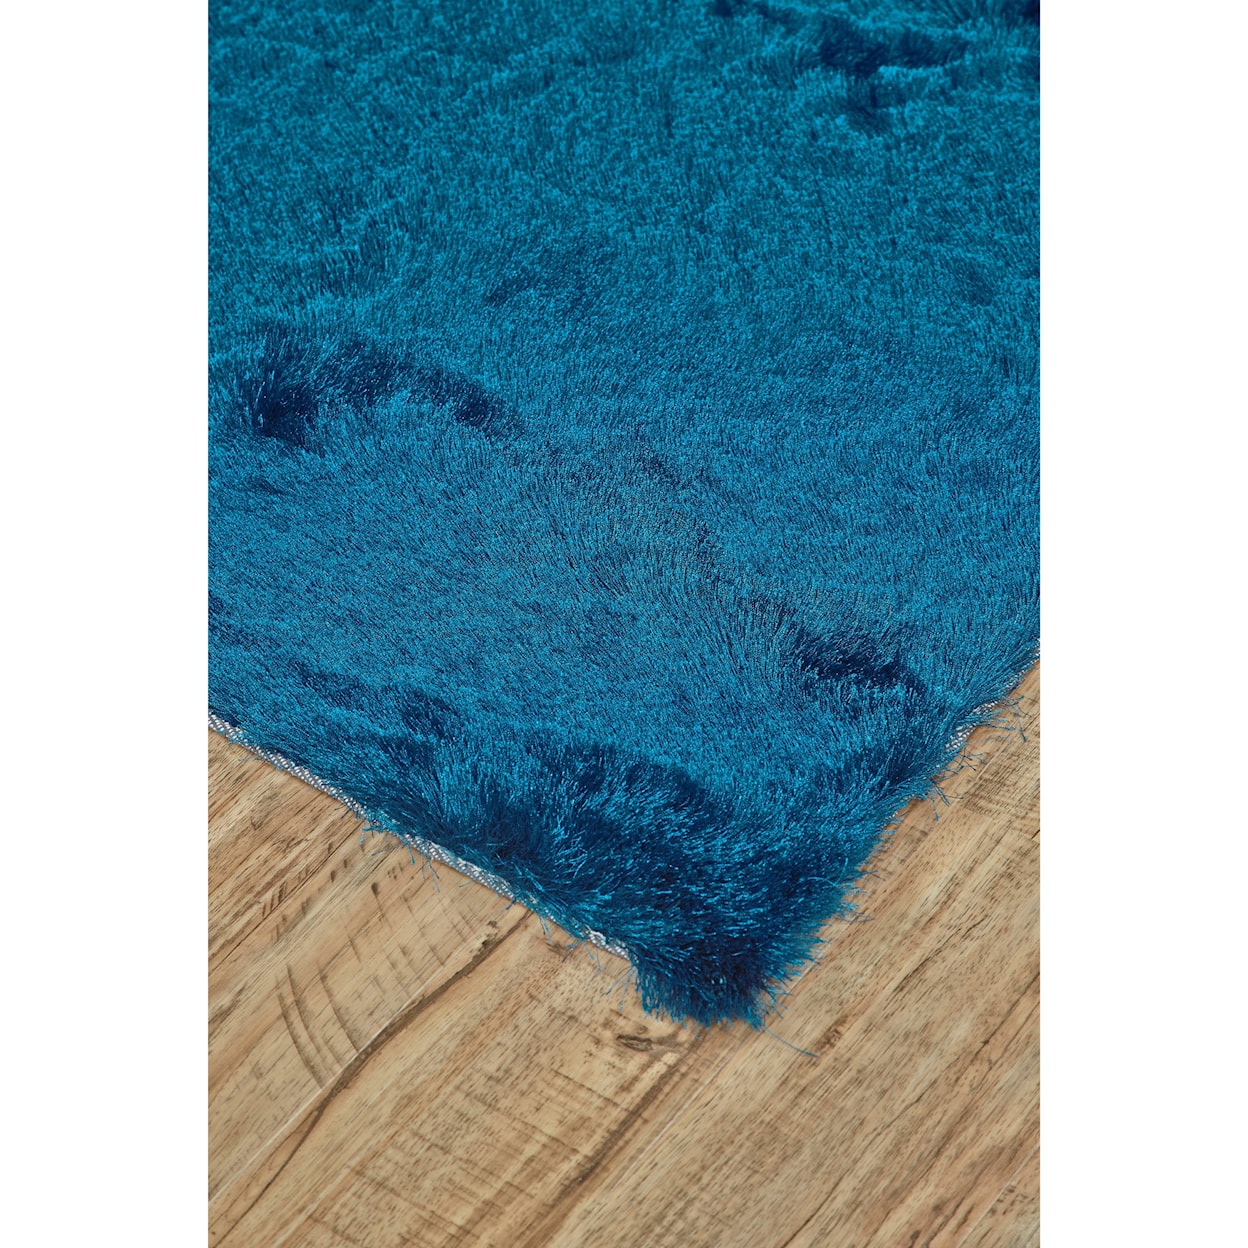 Feizy Rugs Indochine Teal 2'-6" X 6' Runner Rug